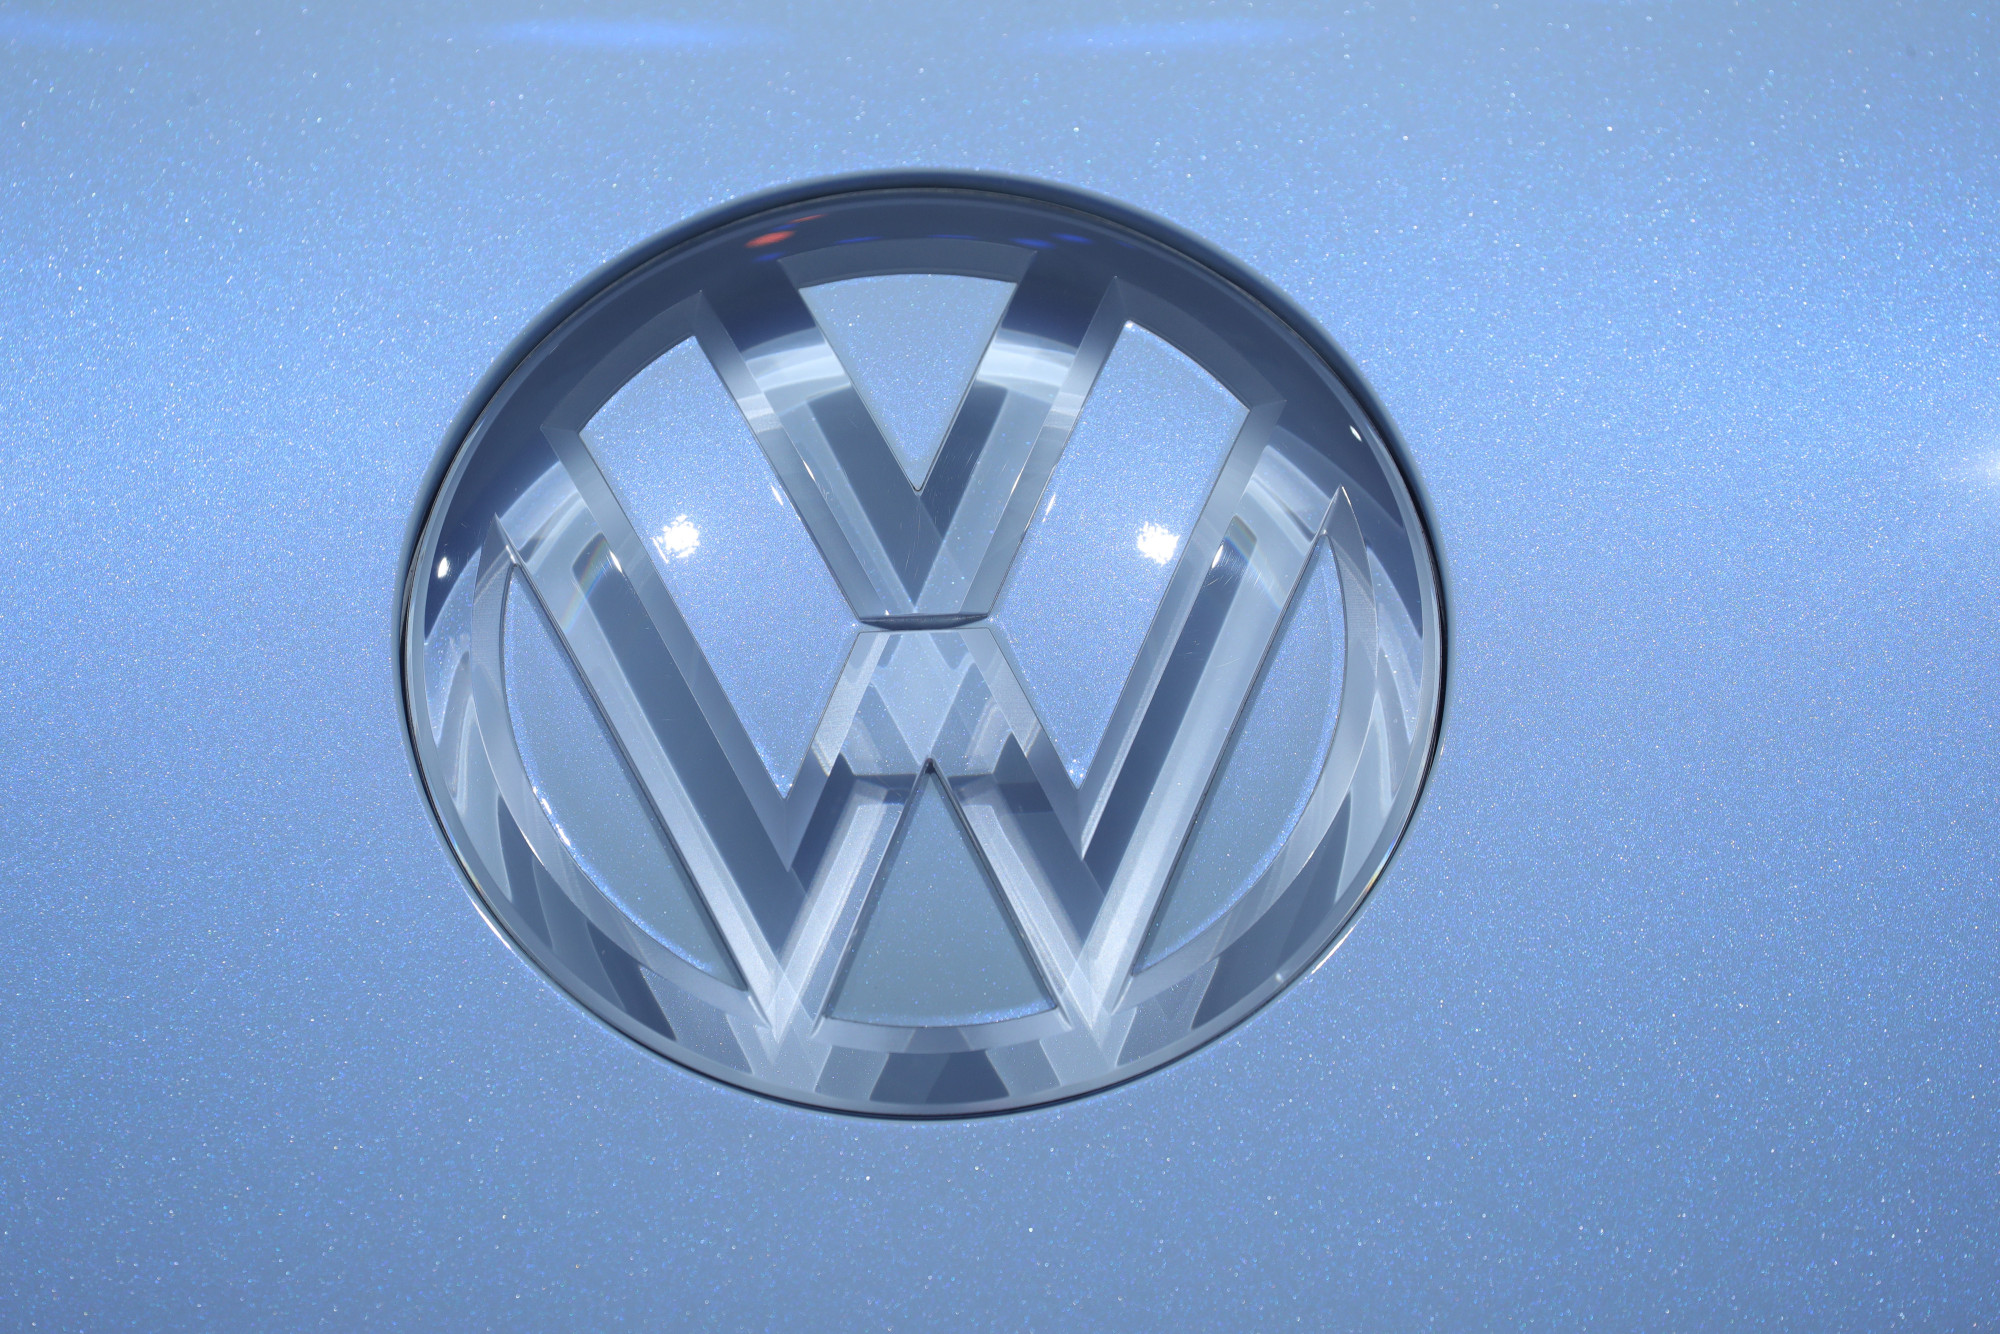 Vw Fired 4 Staff For Breaching Rules In Compliance Crackdown Bloomberg